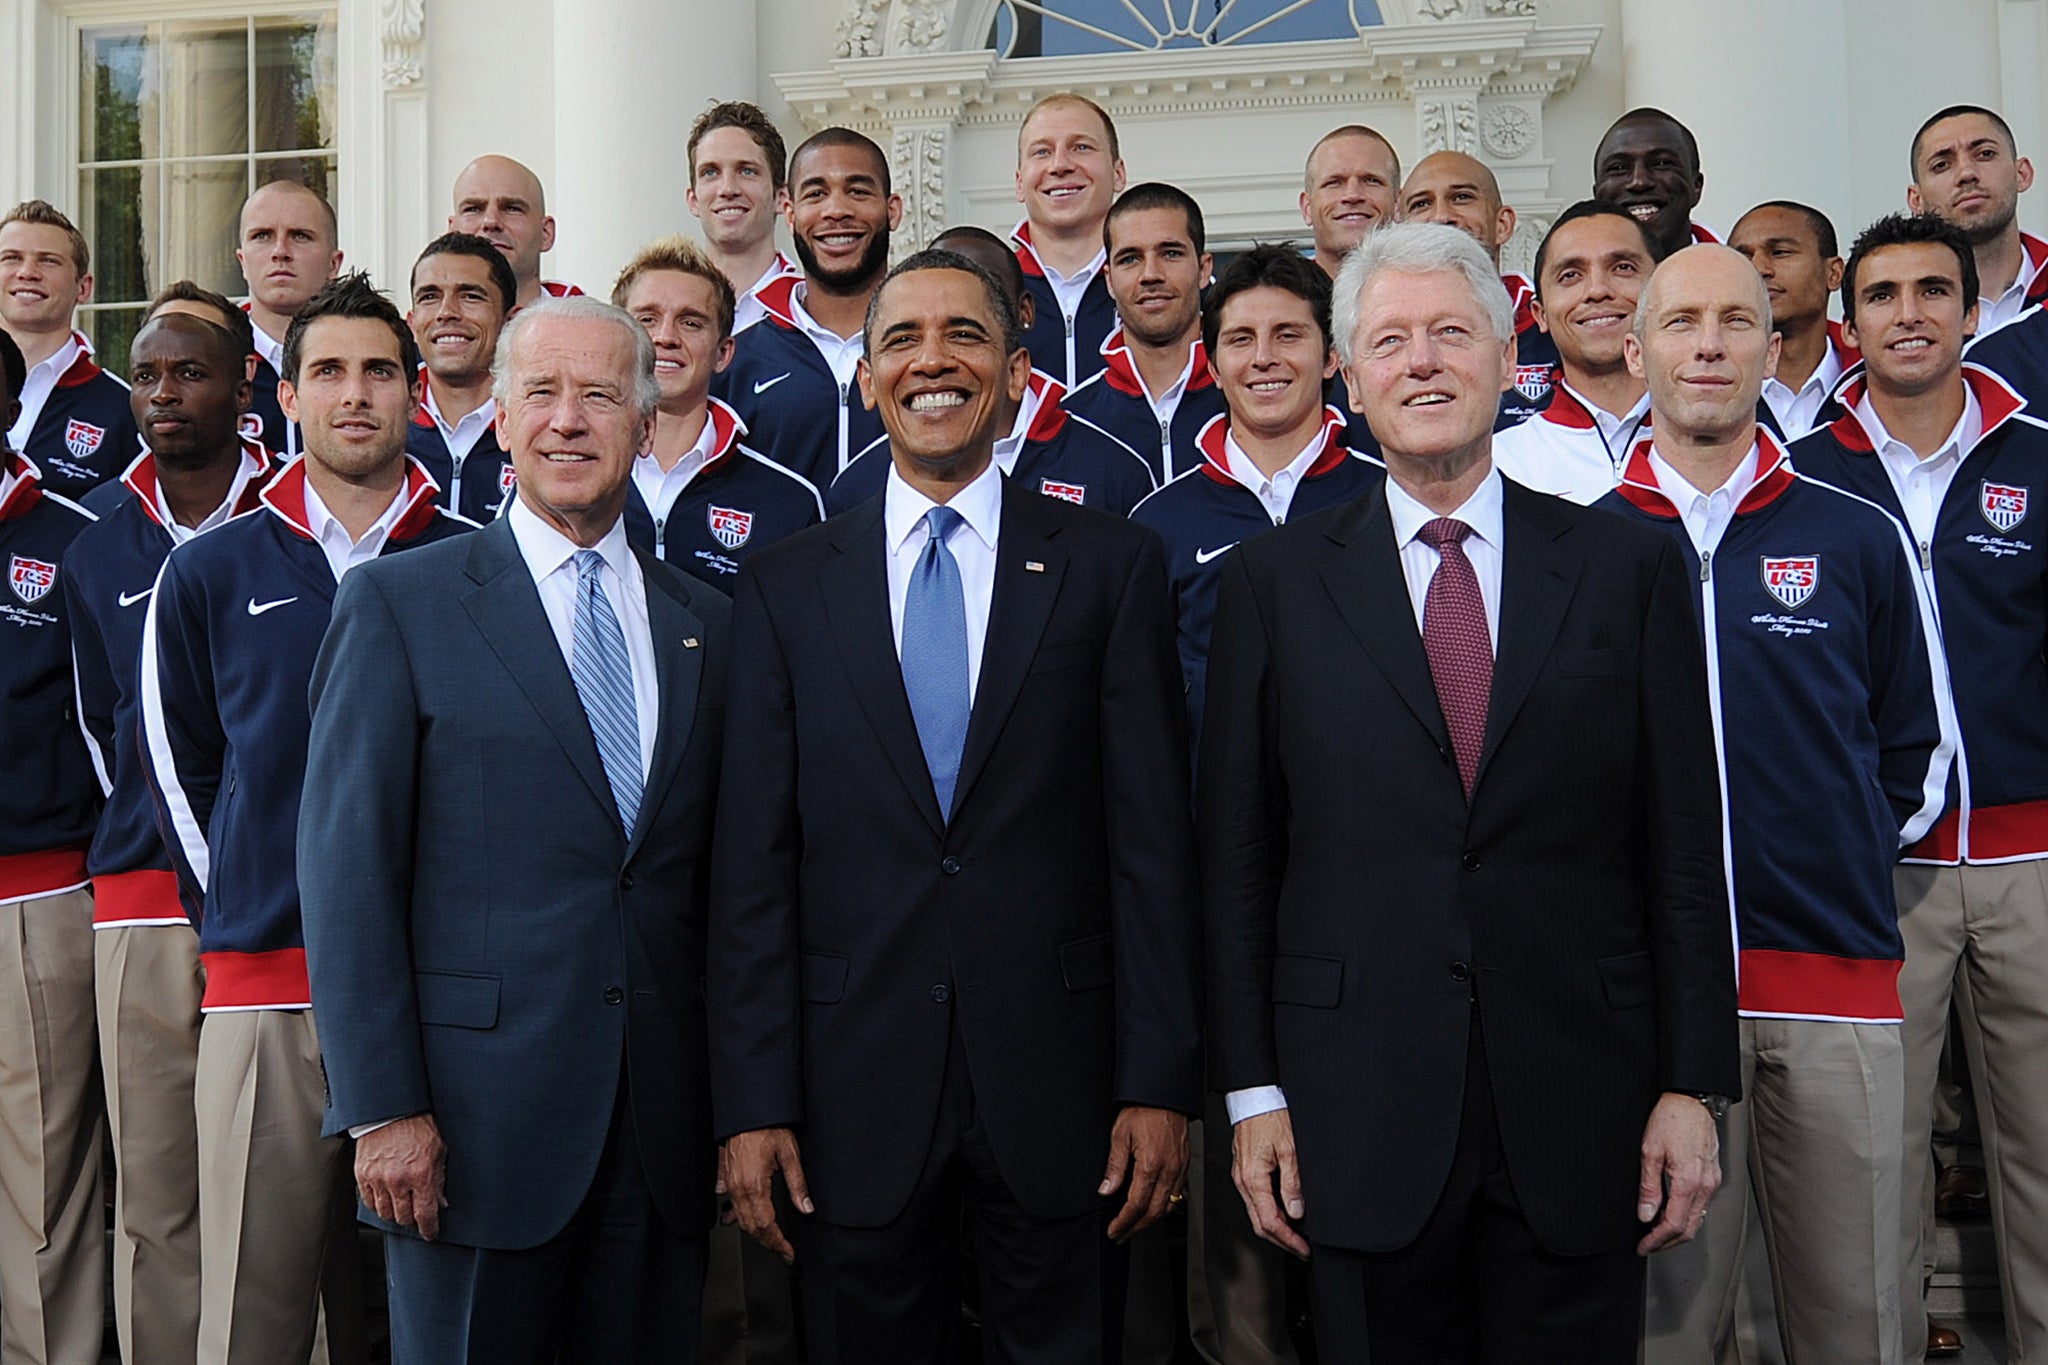 Future president Joe Biden, then-president Barack Obama and former president Bill Clinton at the White House with the US World Cup Soccer Team in May 2010